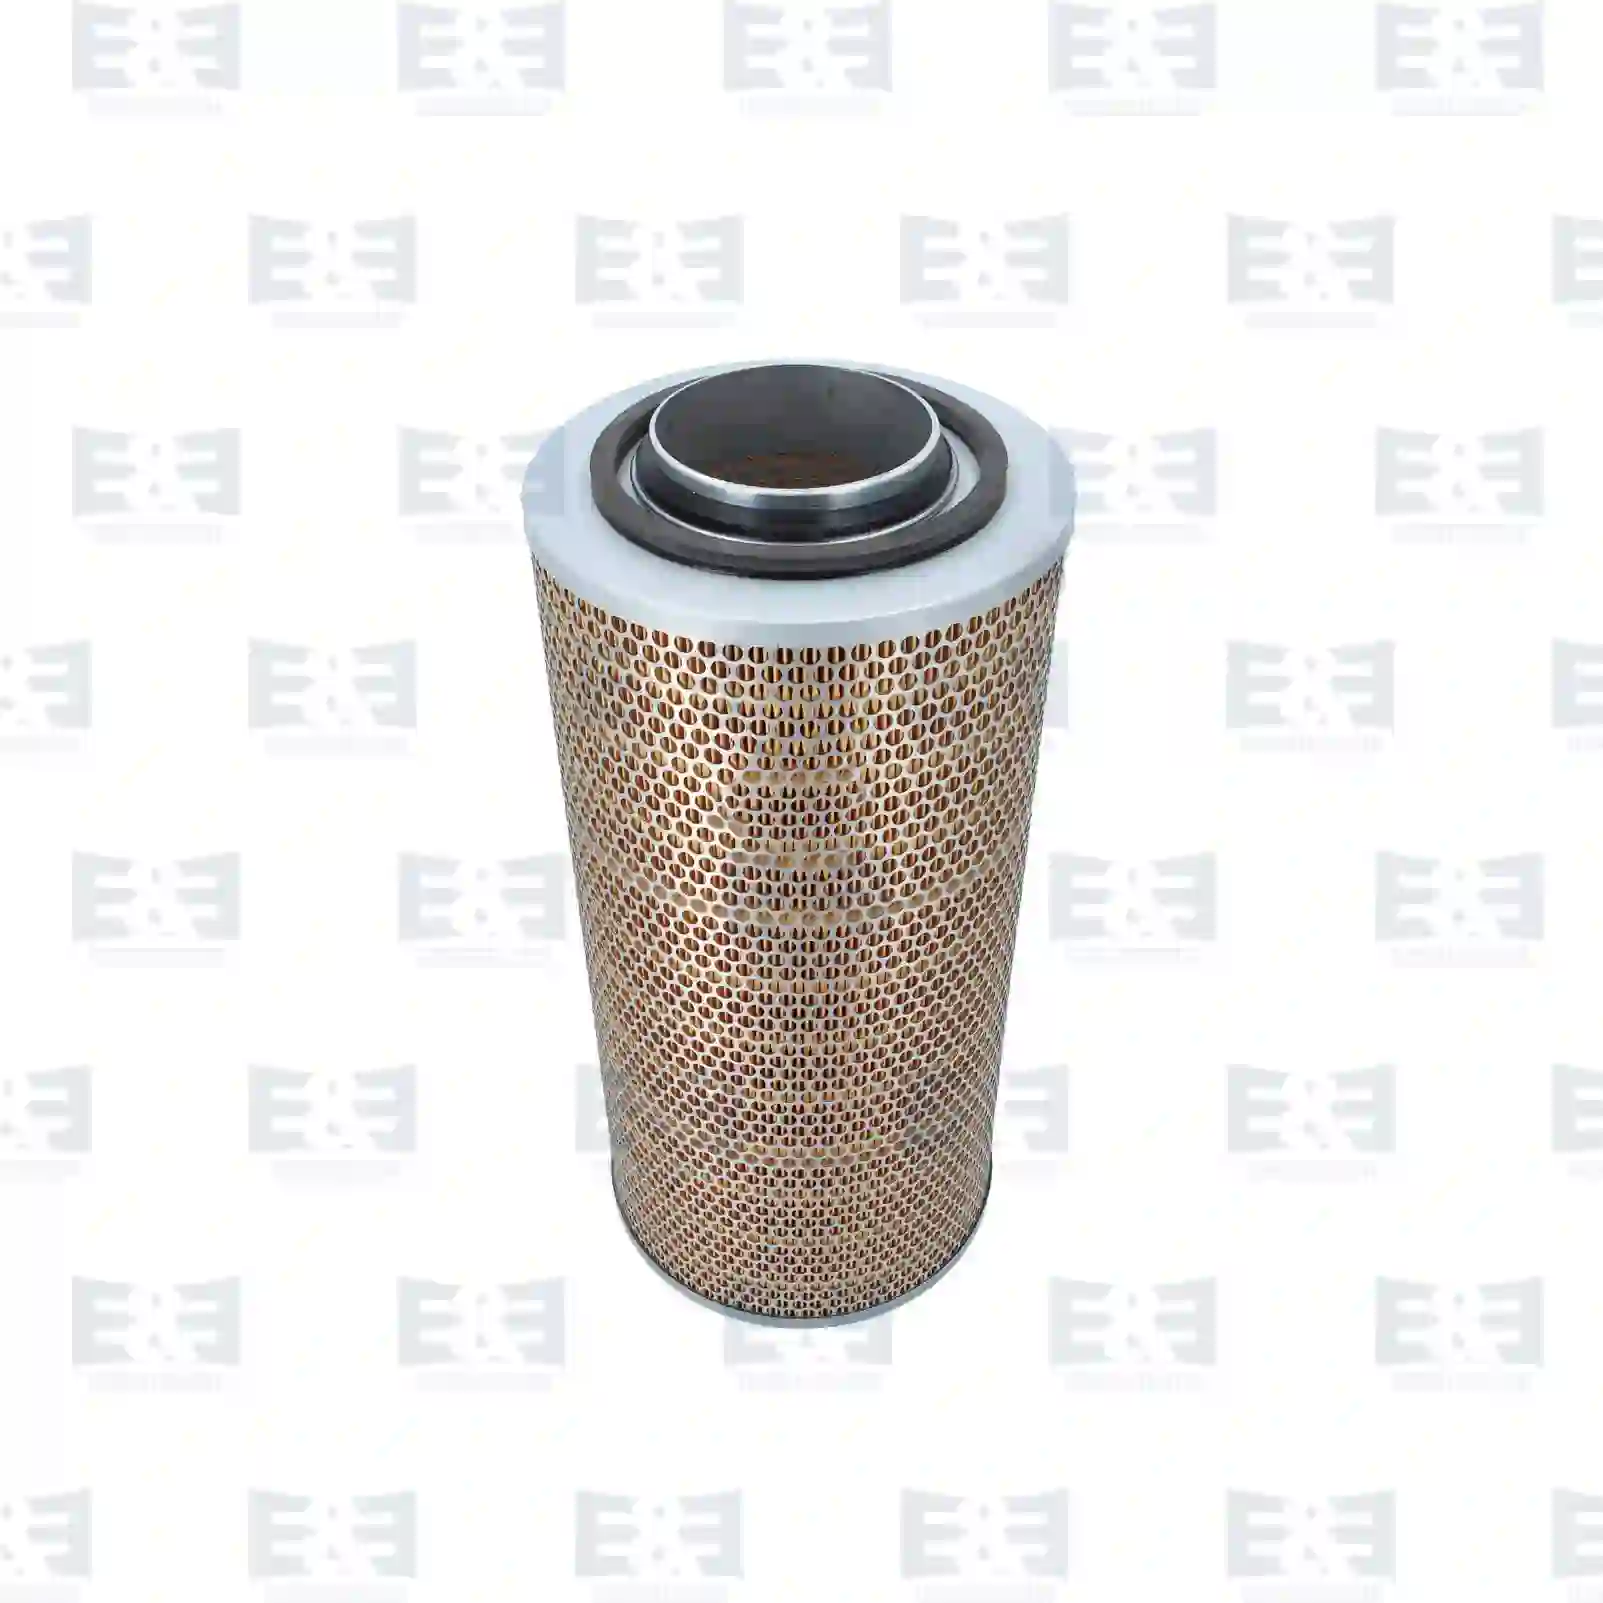 Air filter kit, 2E2204523, 607179S1, 691280S1, 01901925S1, 42481020S1, 81083040057S1, 81083040065S1, 0010947904S1, 3500947104S1, 219517S1, 368016S1, 8319086094S1, 4785748S1, 4785749S1 ||  2E2204523 E&E Truck Spare Parts | Truck Spare Parts, Auotomotive Spare Parts Air filter kit, 2E2204523, 607179S1, 691280S1, 01901925S1, 42481020S1, 81083040057S1, 81083040065S1, 0010947904S1, 3500947104S1, 219517S1, 368016S1, 8319086094S1, 4785748S1, 4785749S1 ||  2E2204523 E&E Truck Spare Parts | Truck Spare Parts, Auotomotive Spare Parts